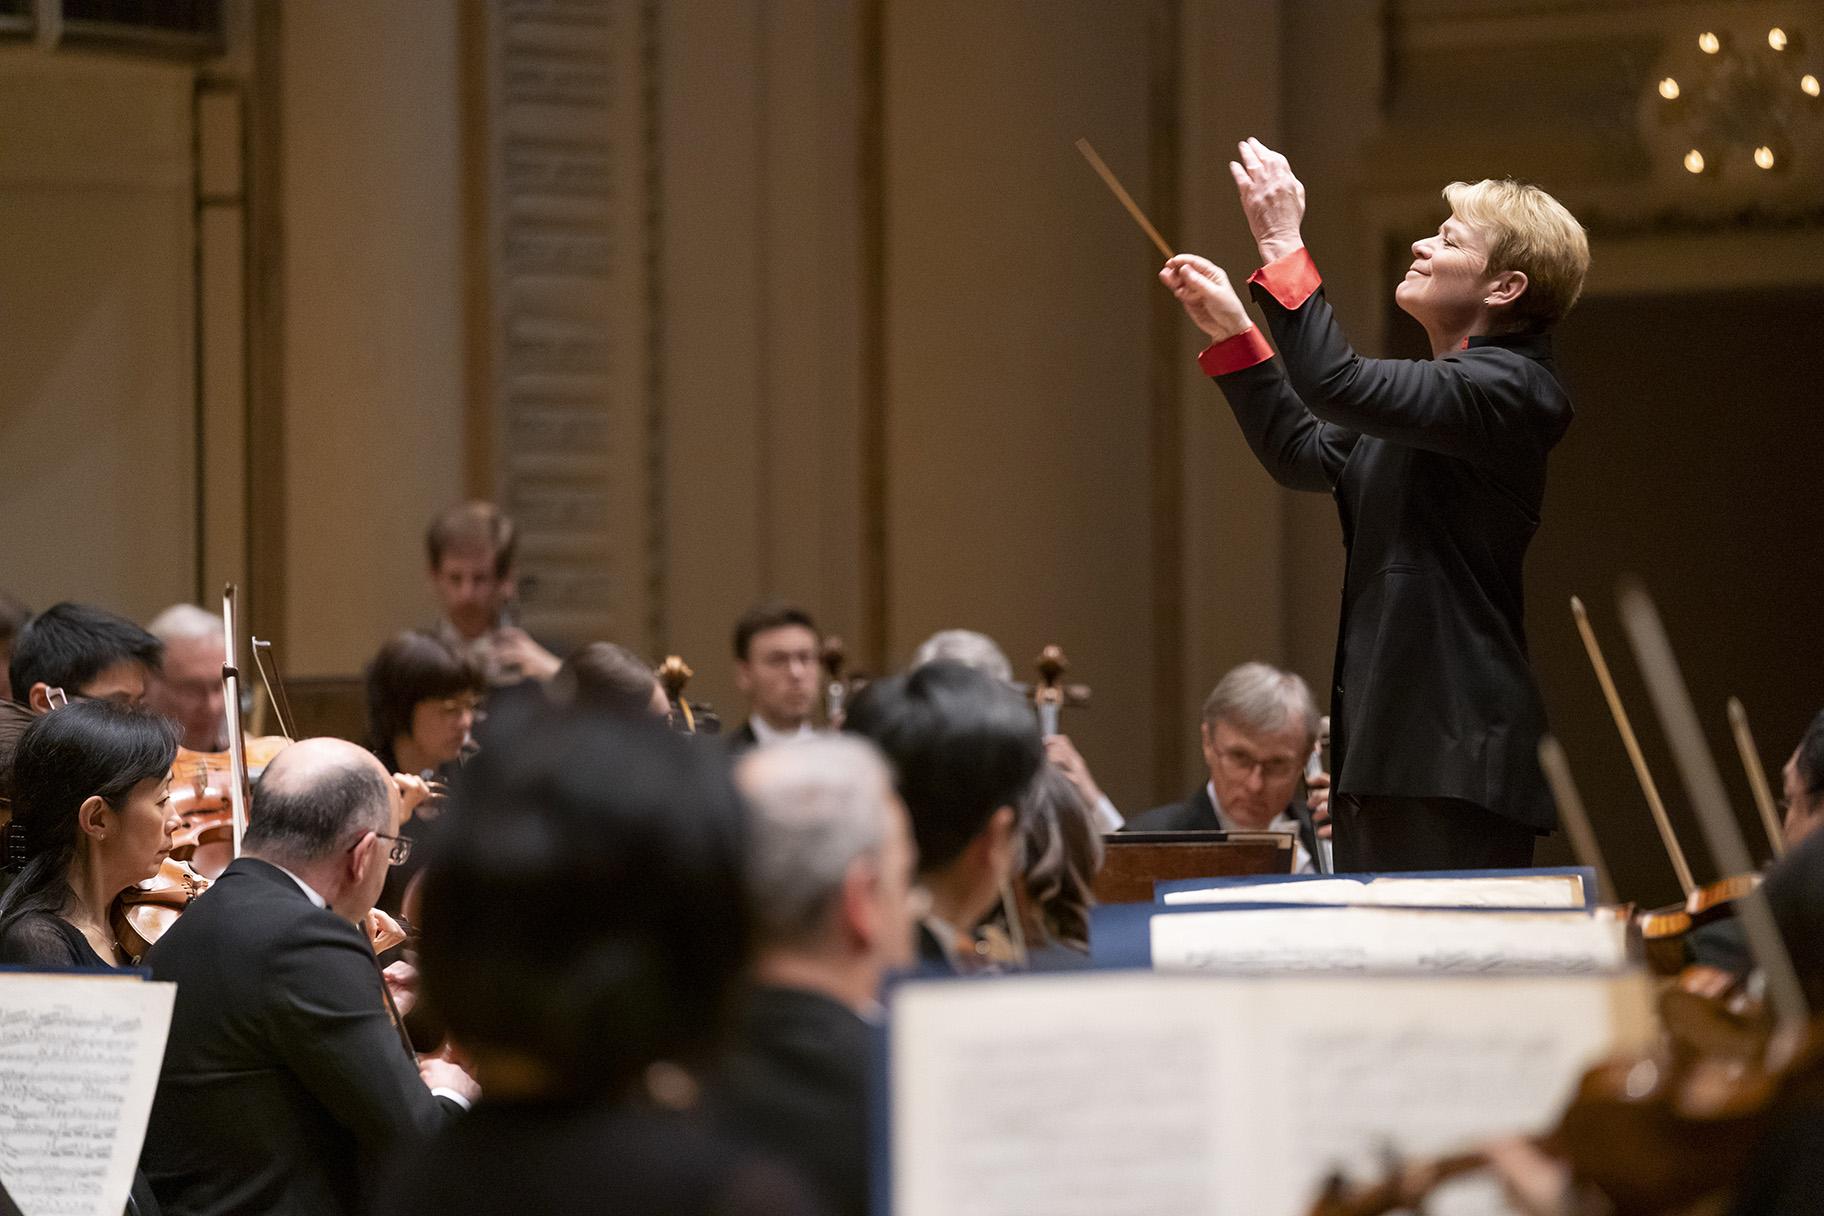 Conductor Marin Alsop leads the Chicago Symphony Orchestra in Brahms’s “Academic Festival” Overture. (© Todd Rosenberg)